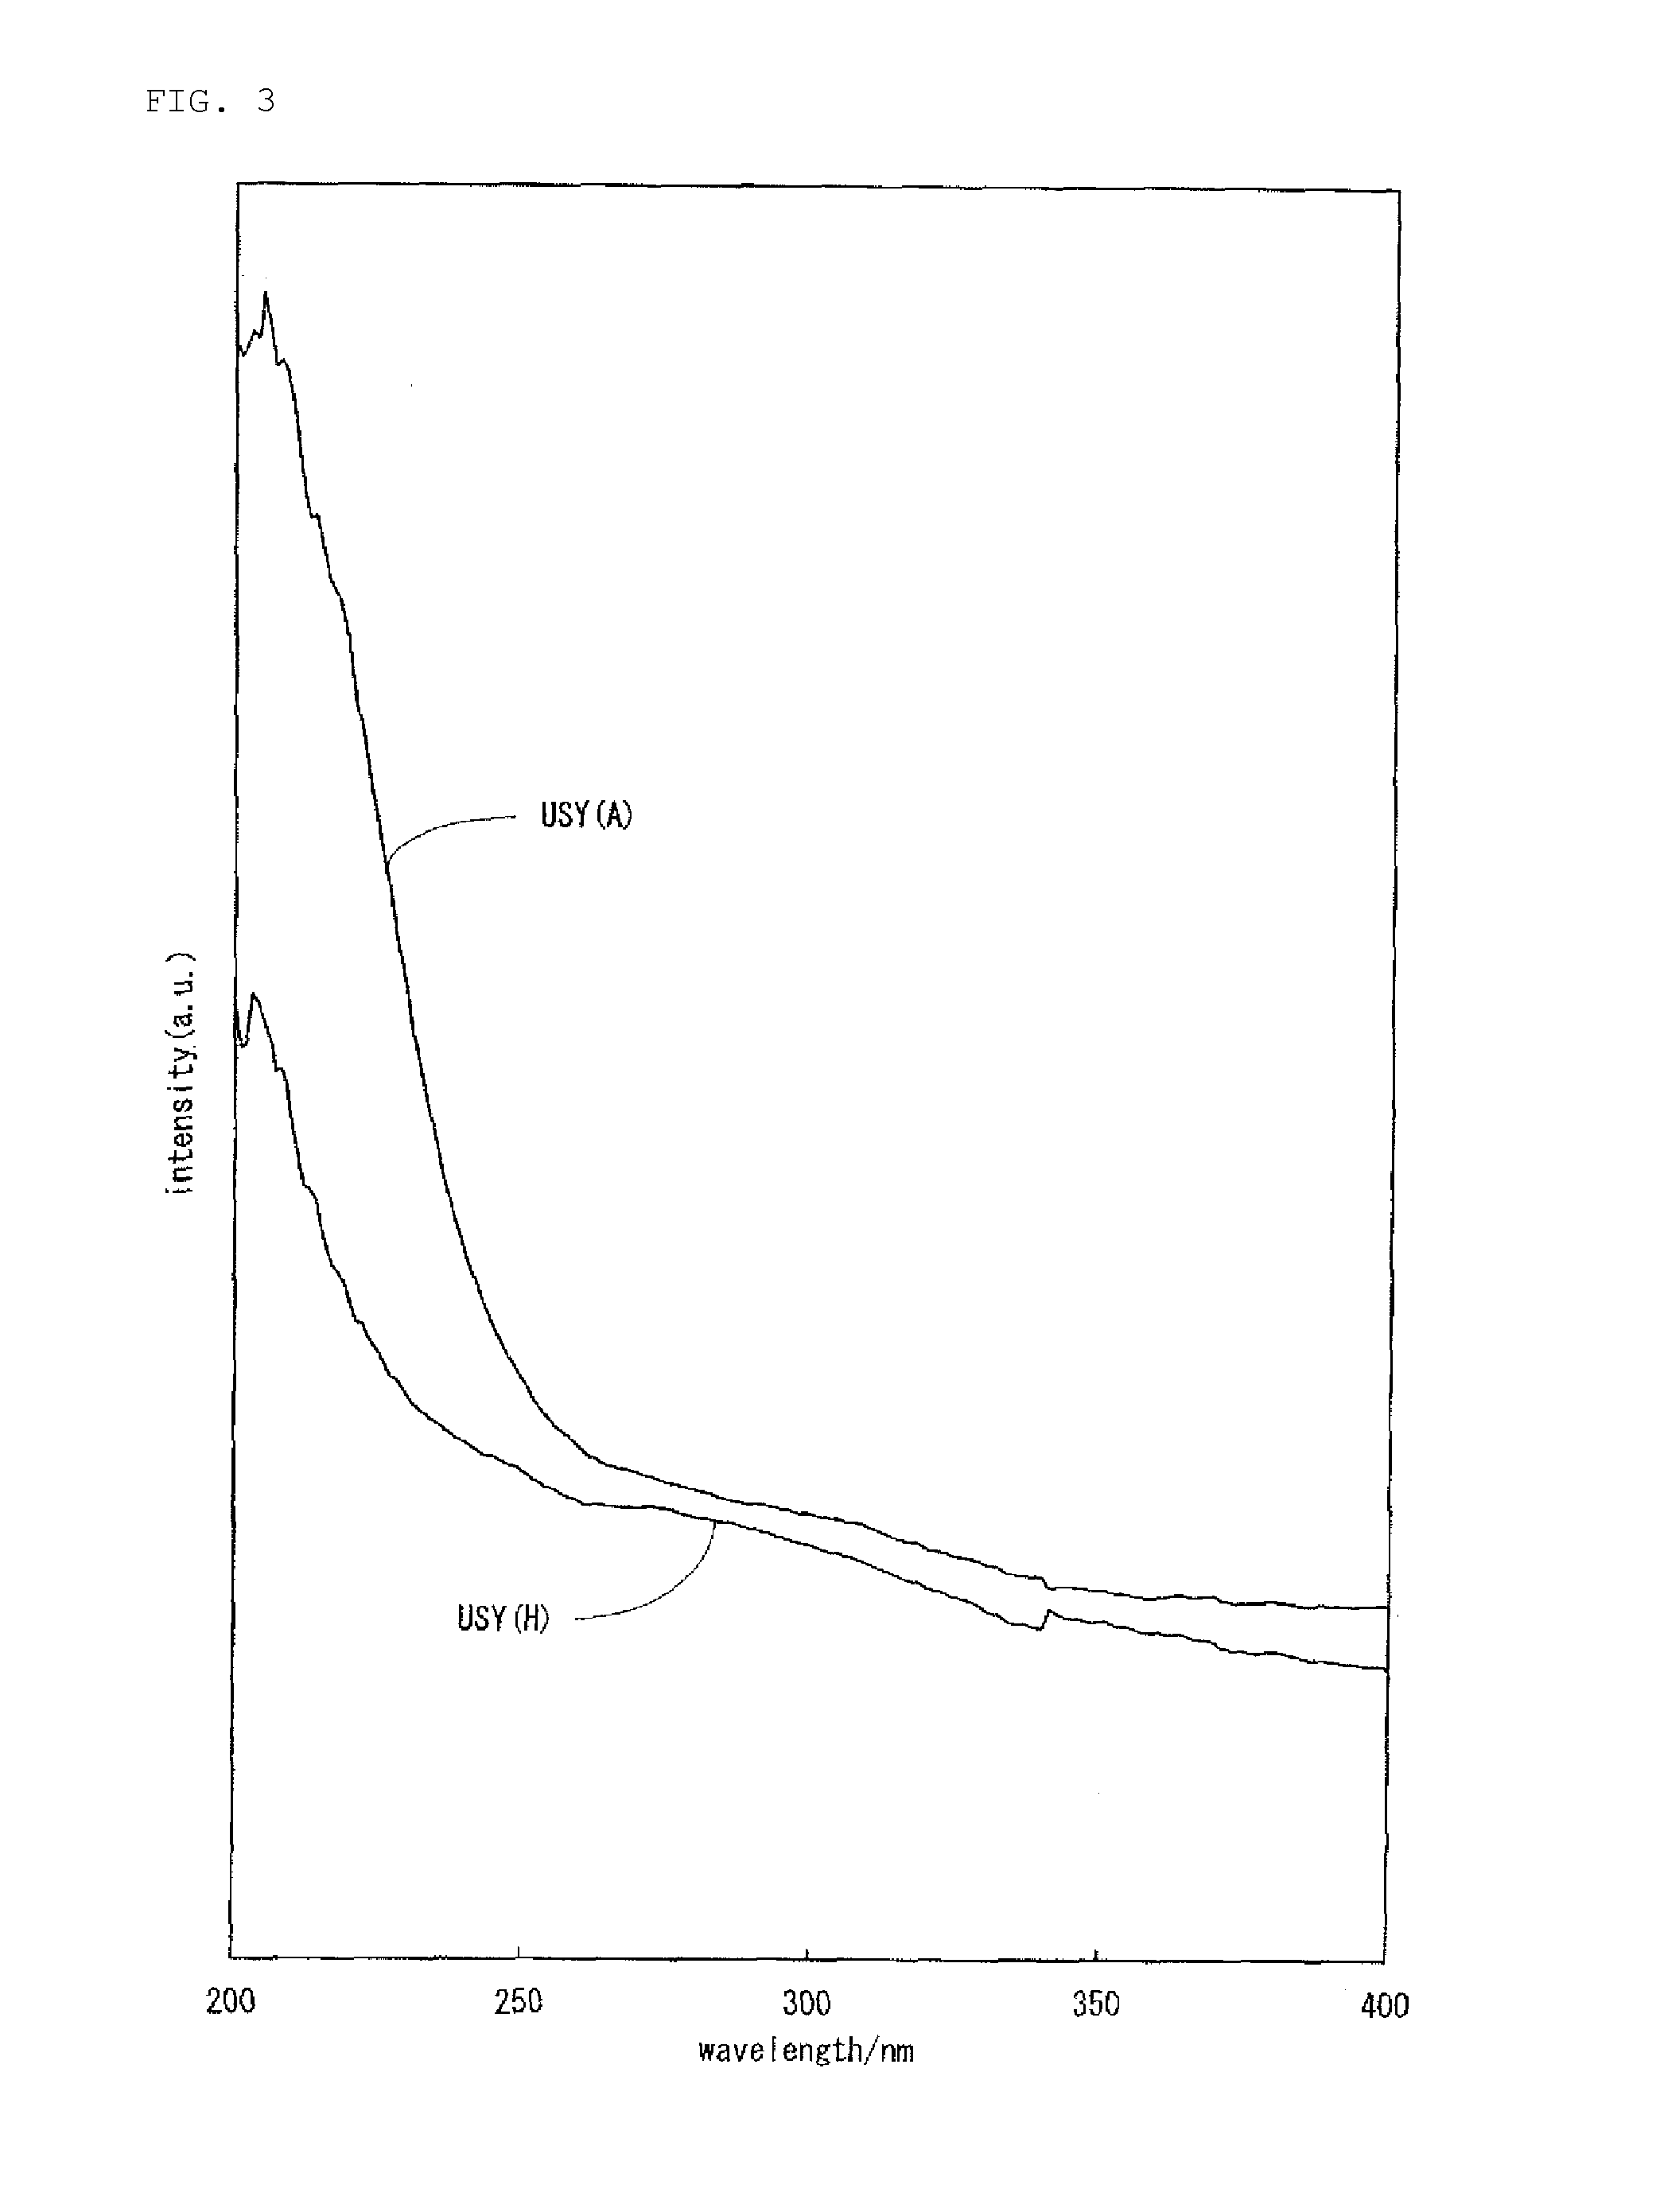 Hydrocracking catalyst for hydrocarbon oil, method for producing hydrocracking catalyst, and method for hydrocracking hydrocarbon oil with hydrocracking catalyst